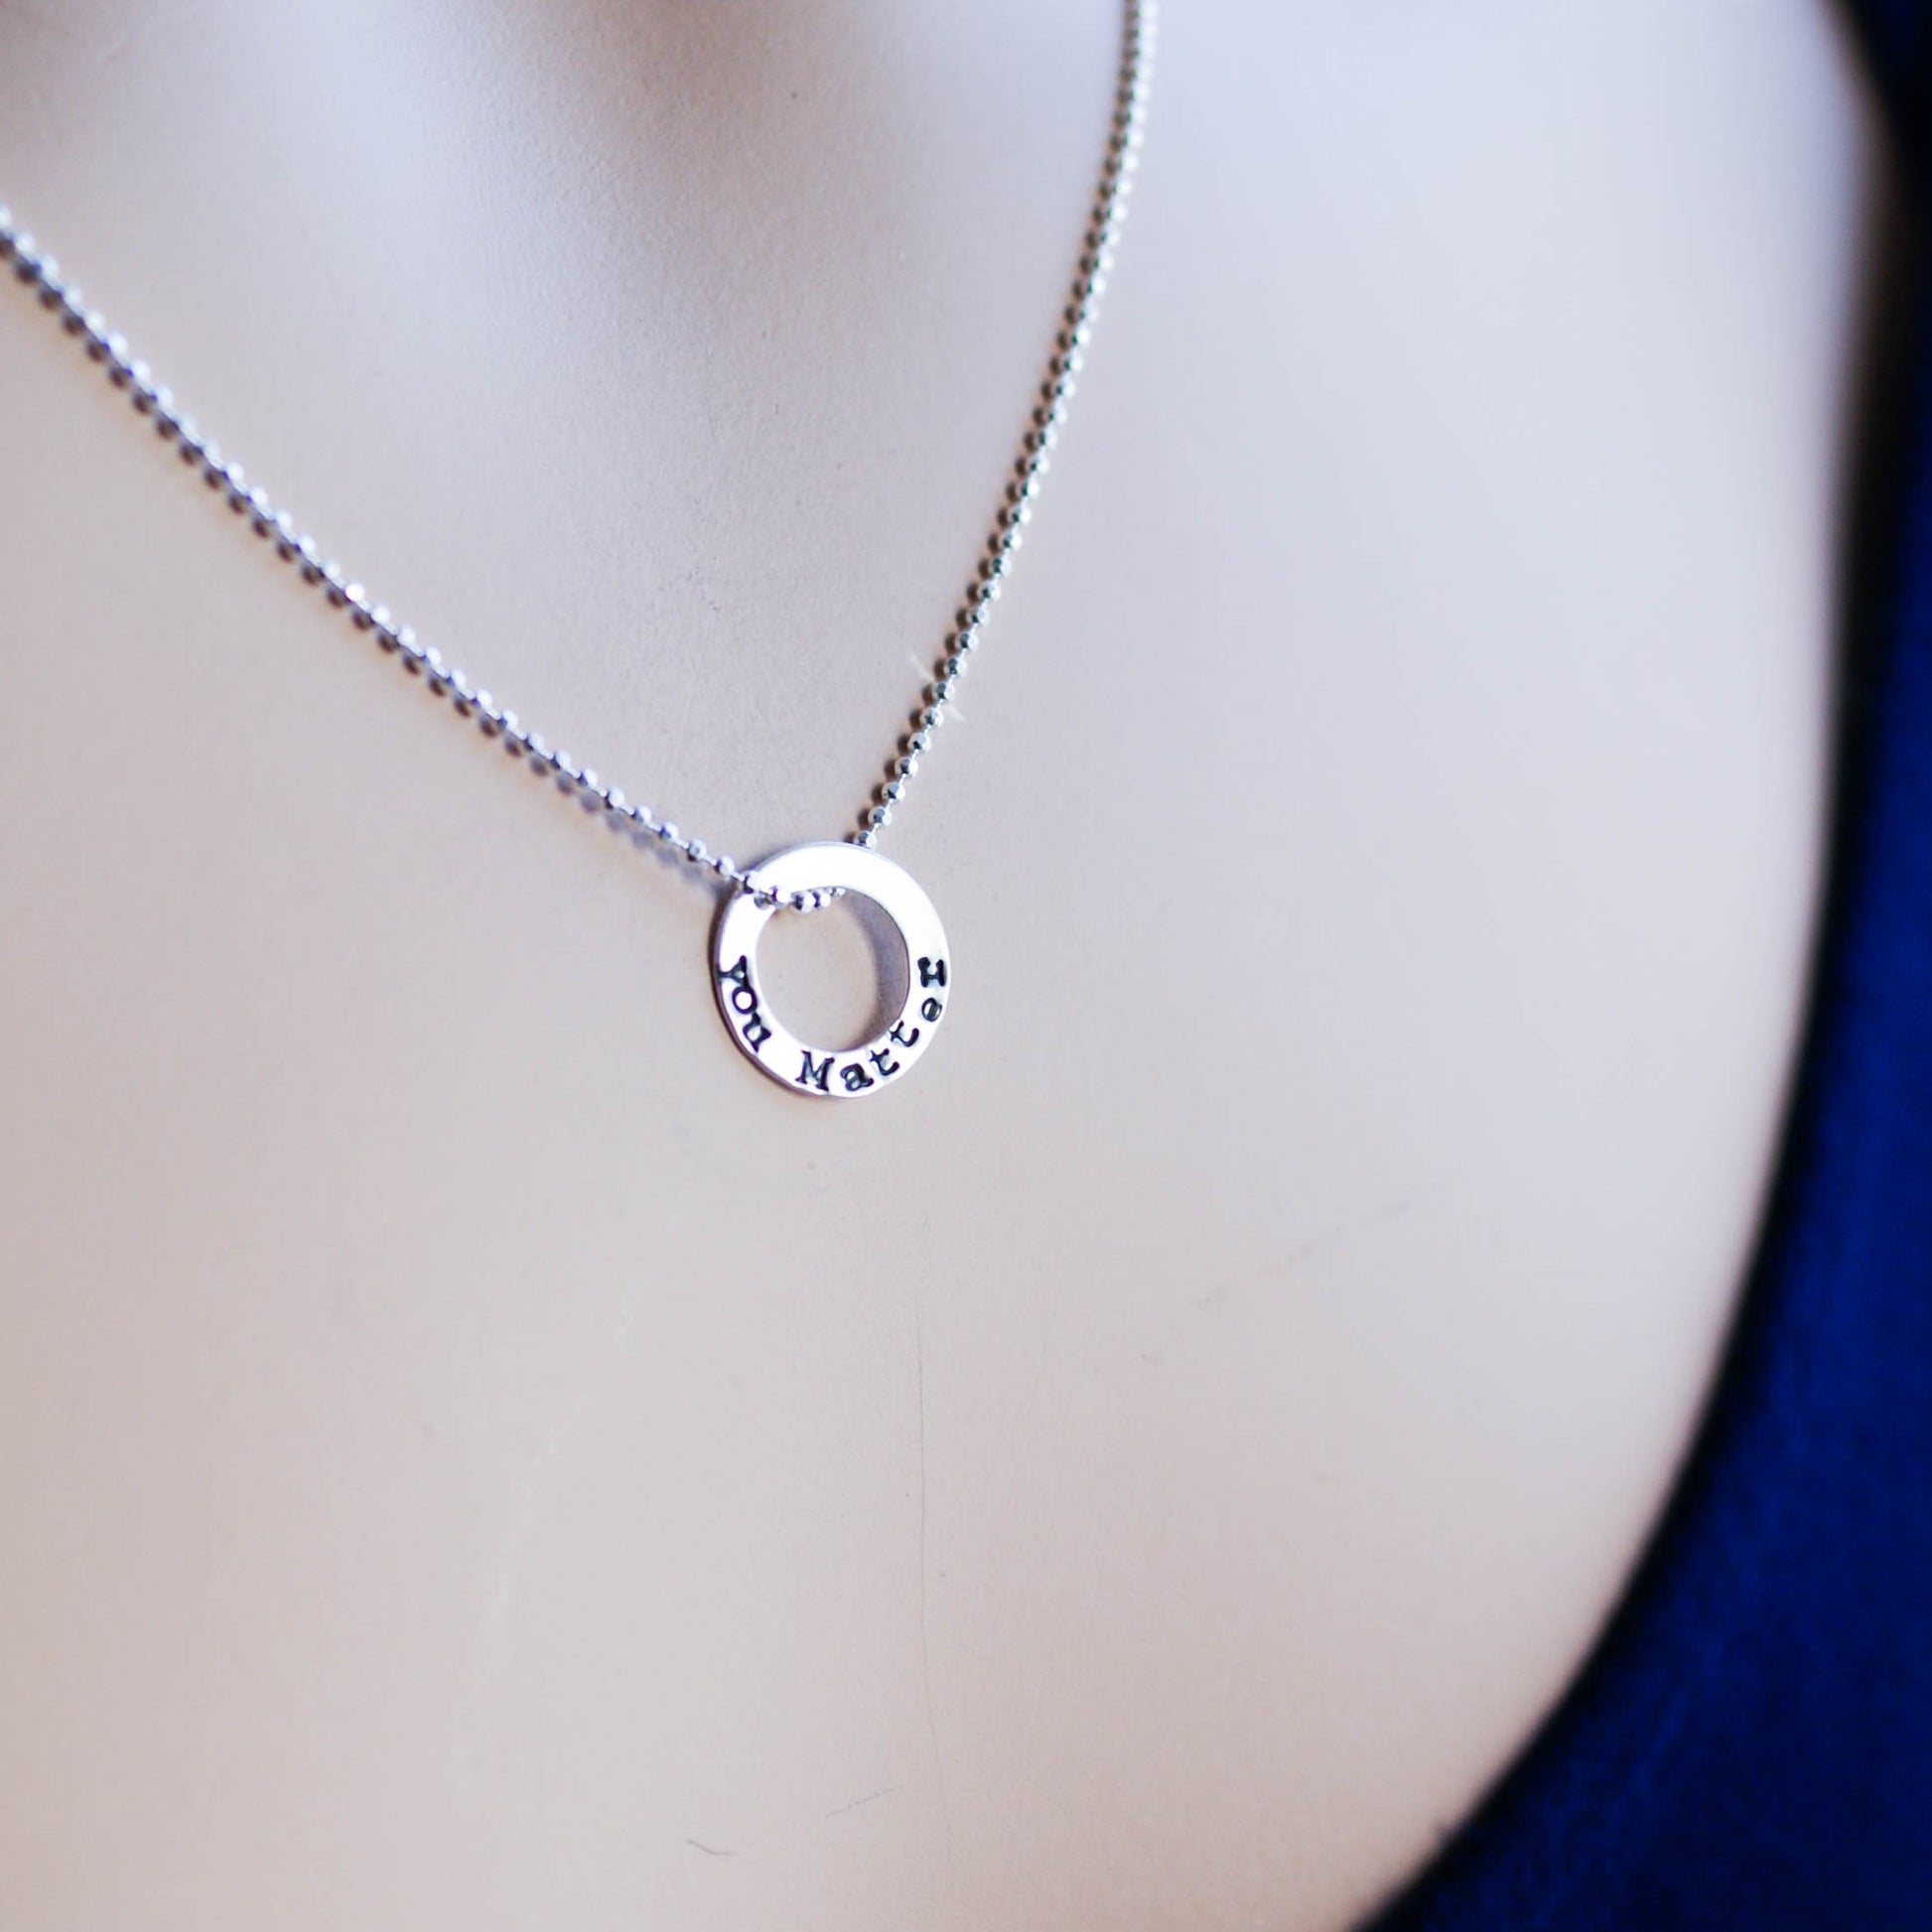 Tiny circle necklace in sterling silver stamped with You Matter on neck